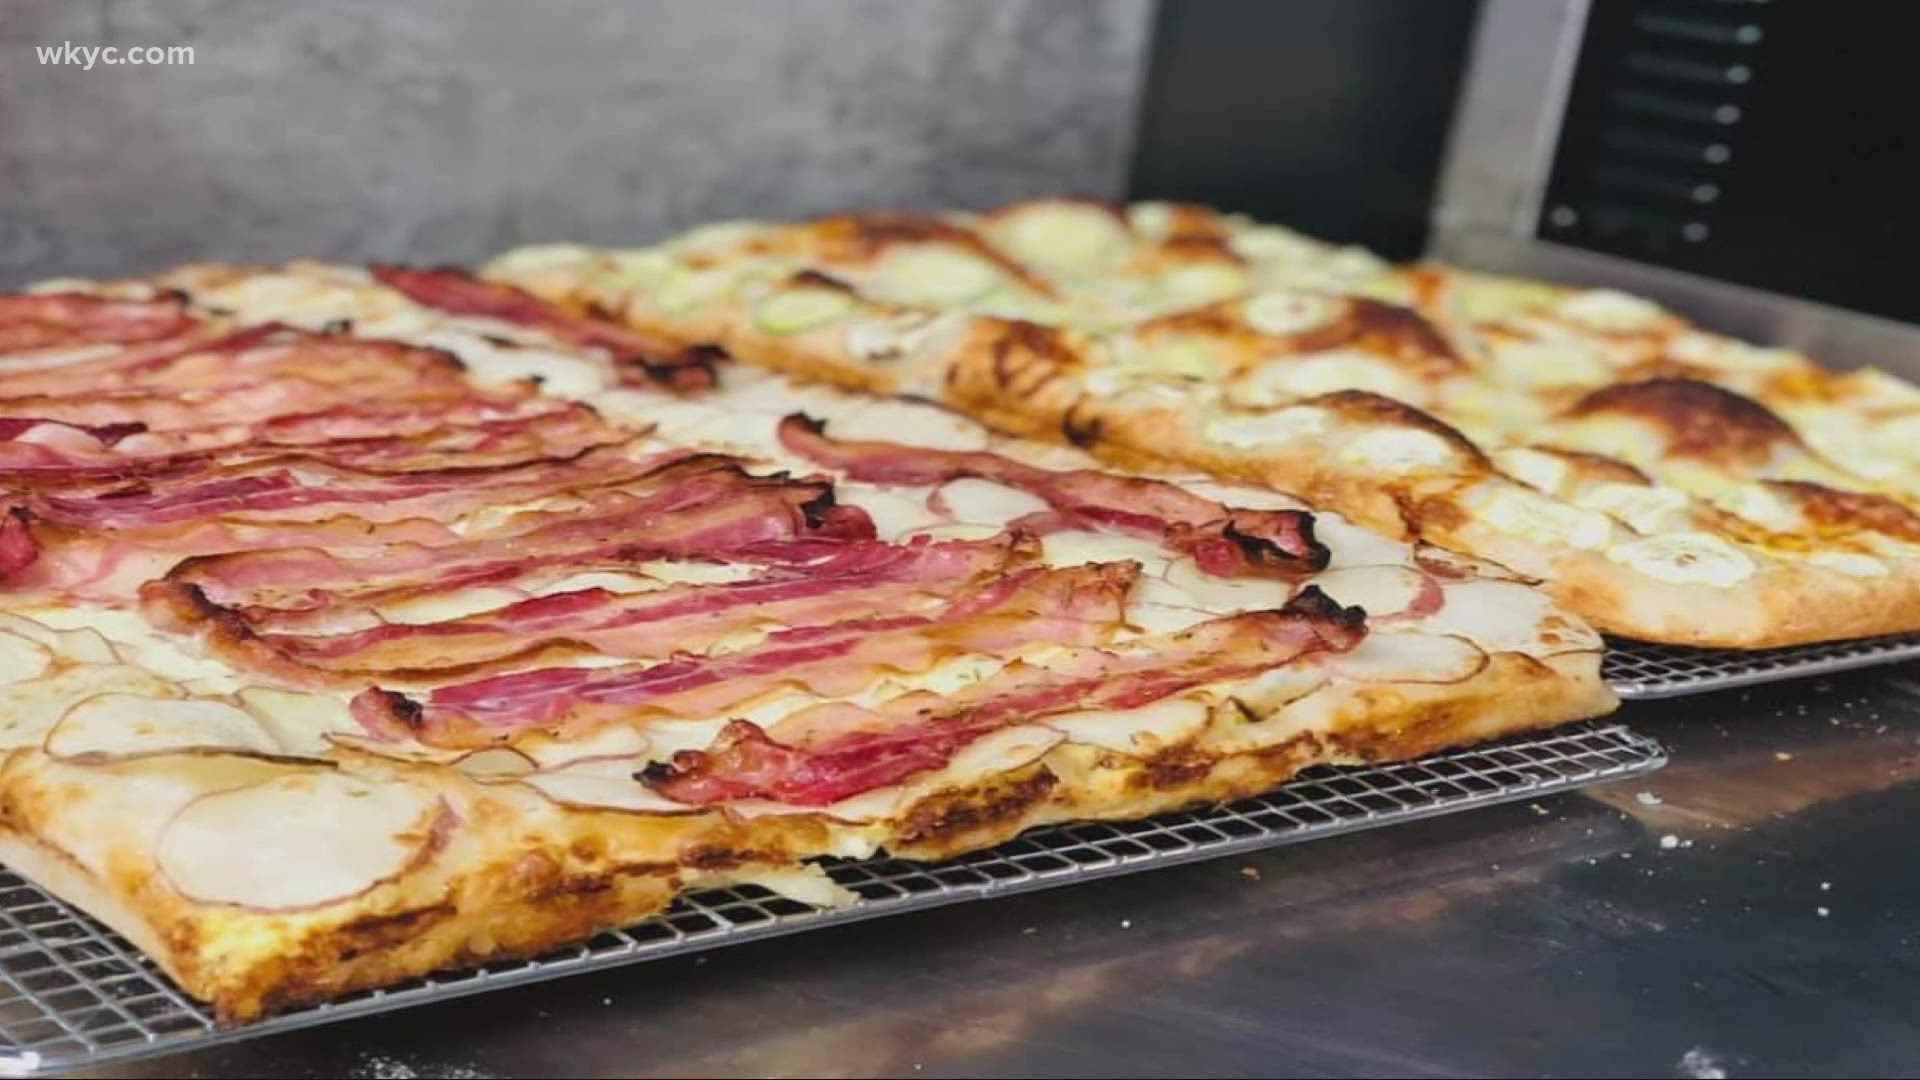 Nov. 8, 2020: Here's what you can expect from the pizza at Citizen Pie on E. 4th Street in downtown Cleveland.